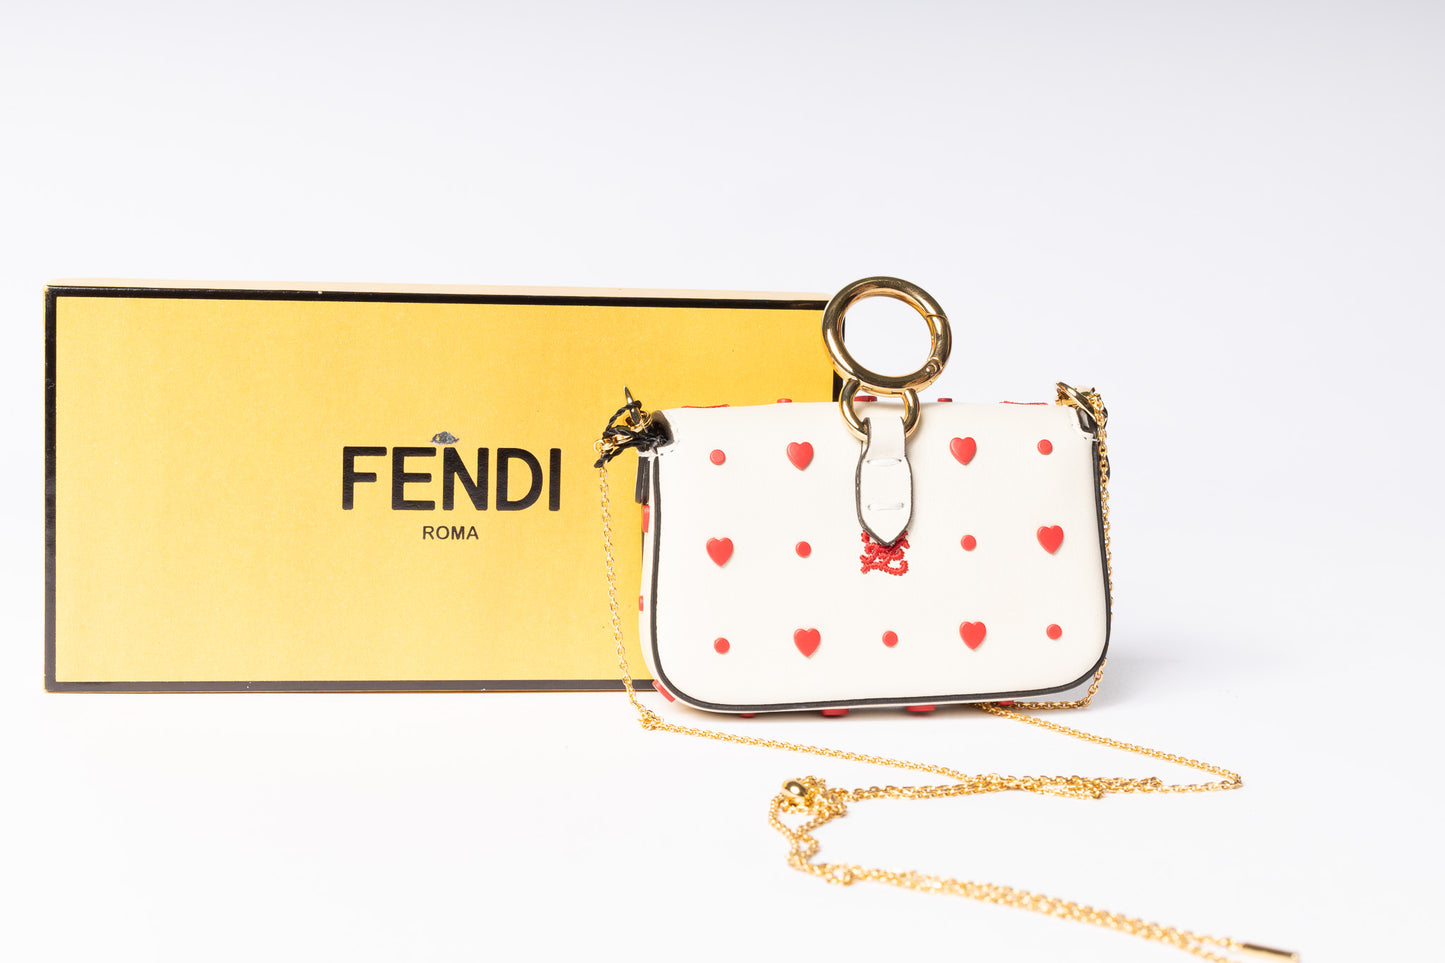 Fendi Micro Baguette Heart Bag - Quirky and chic, a must-have accessory for adding a touch of playfulness to your style